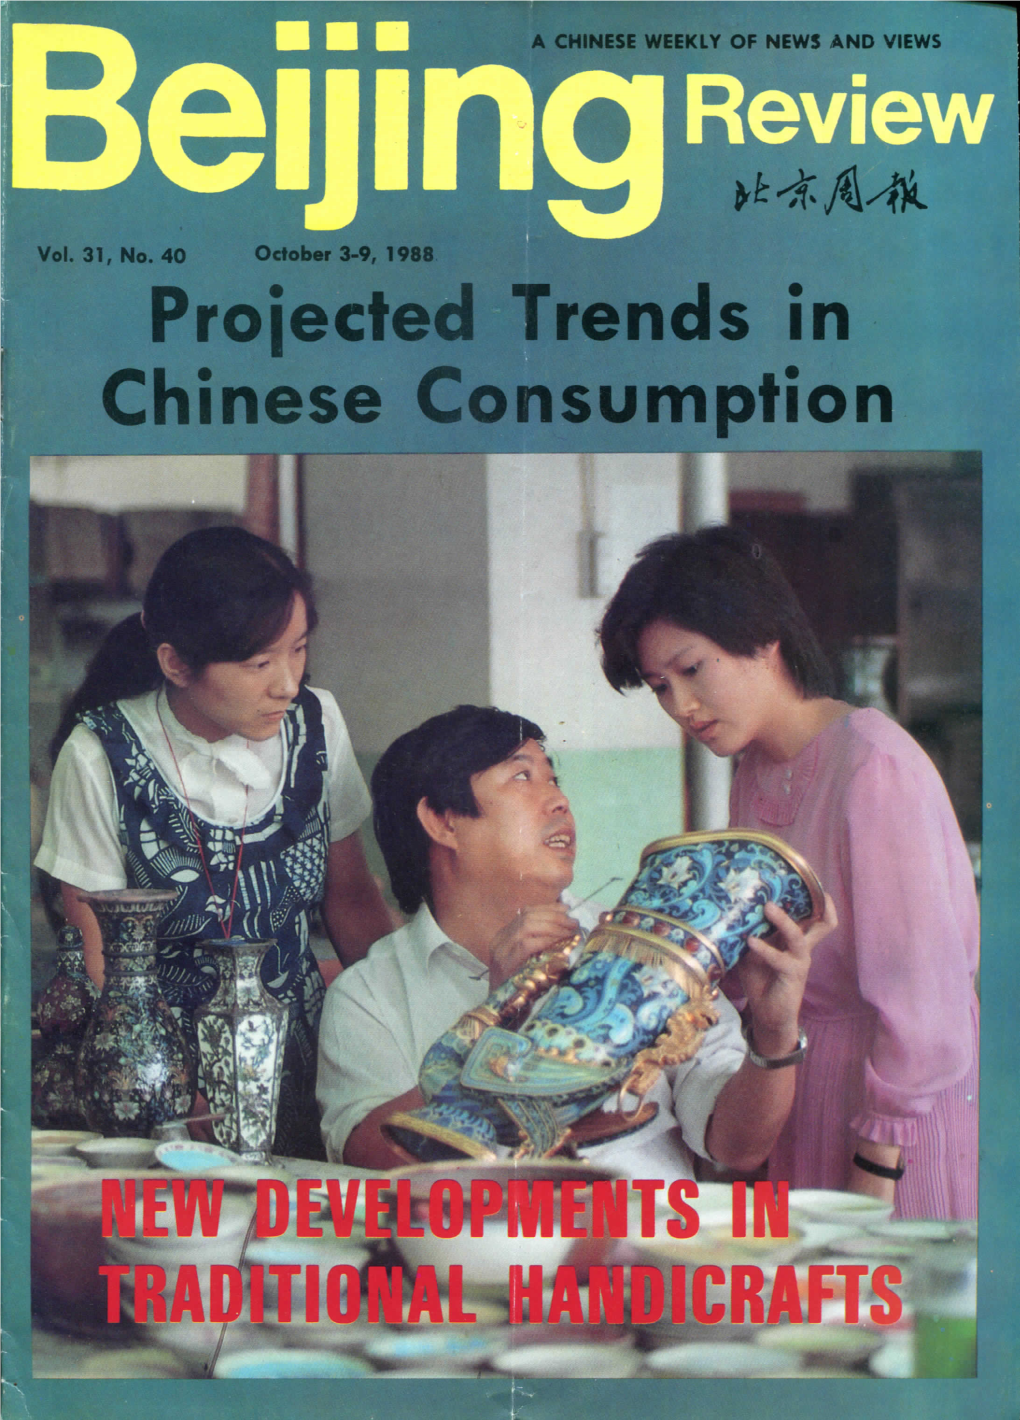 Projected Trends in Chinese Consumption Women As Half the Sky (Photo by Bapbtepmchana, USSR) Represents the Labour Strength of Women Who Make up Half the Workforce